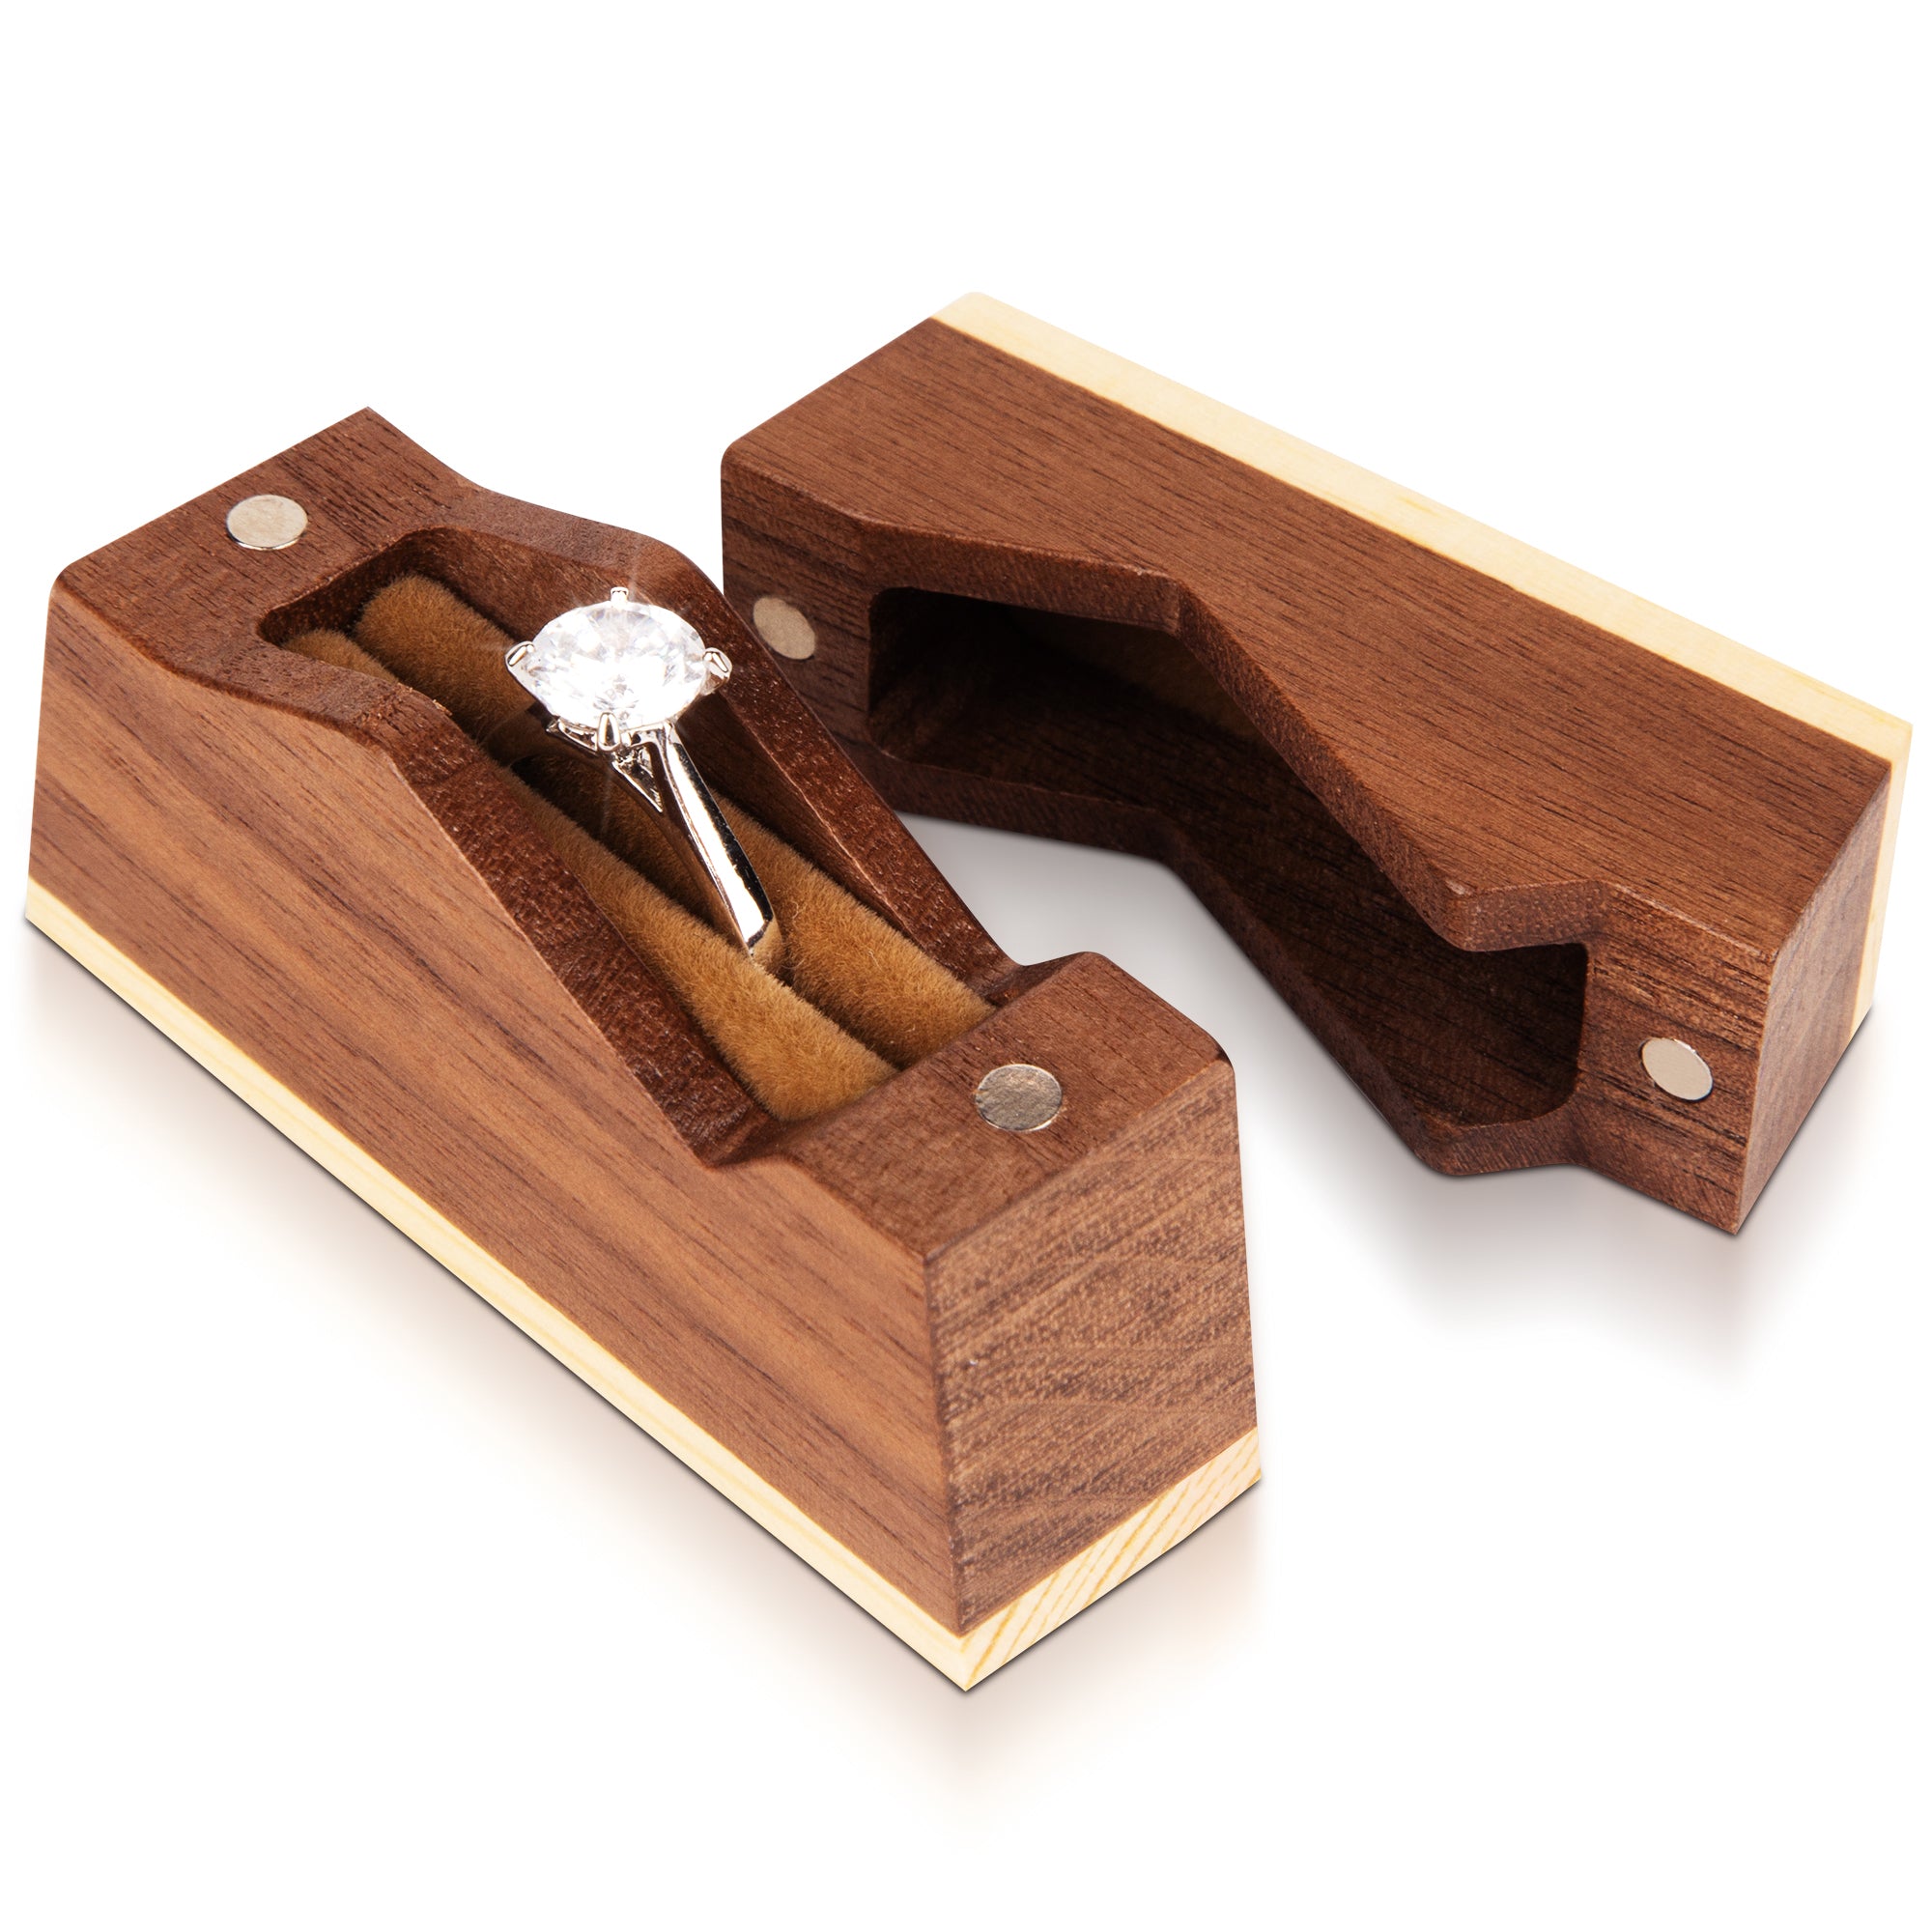 Engagement Ring Box For Proposal - Walnut Wood